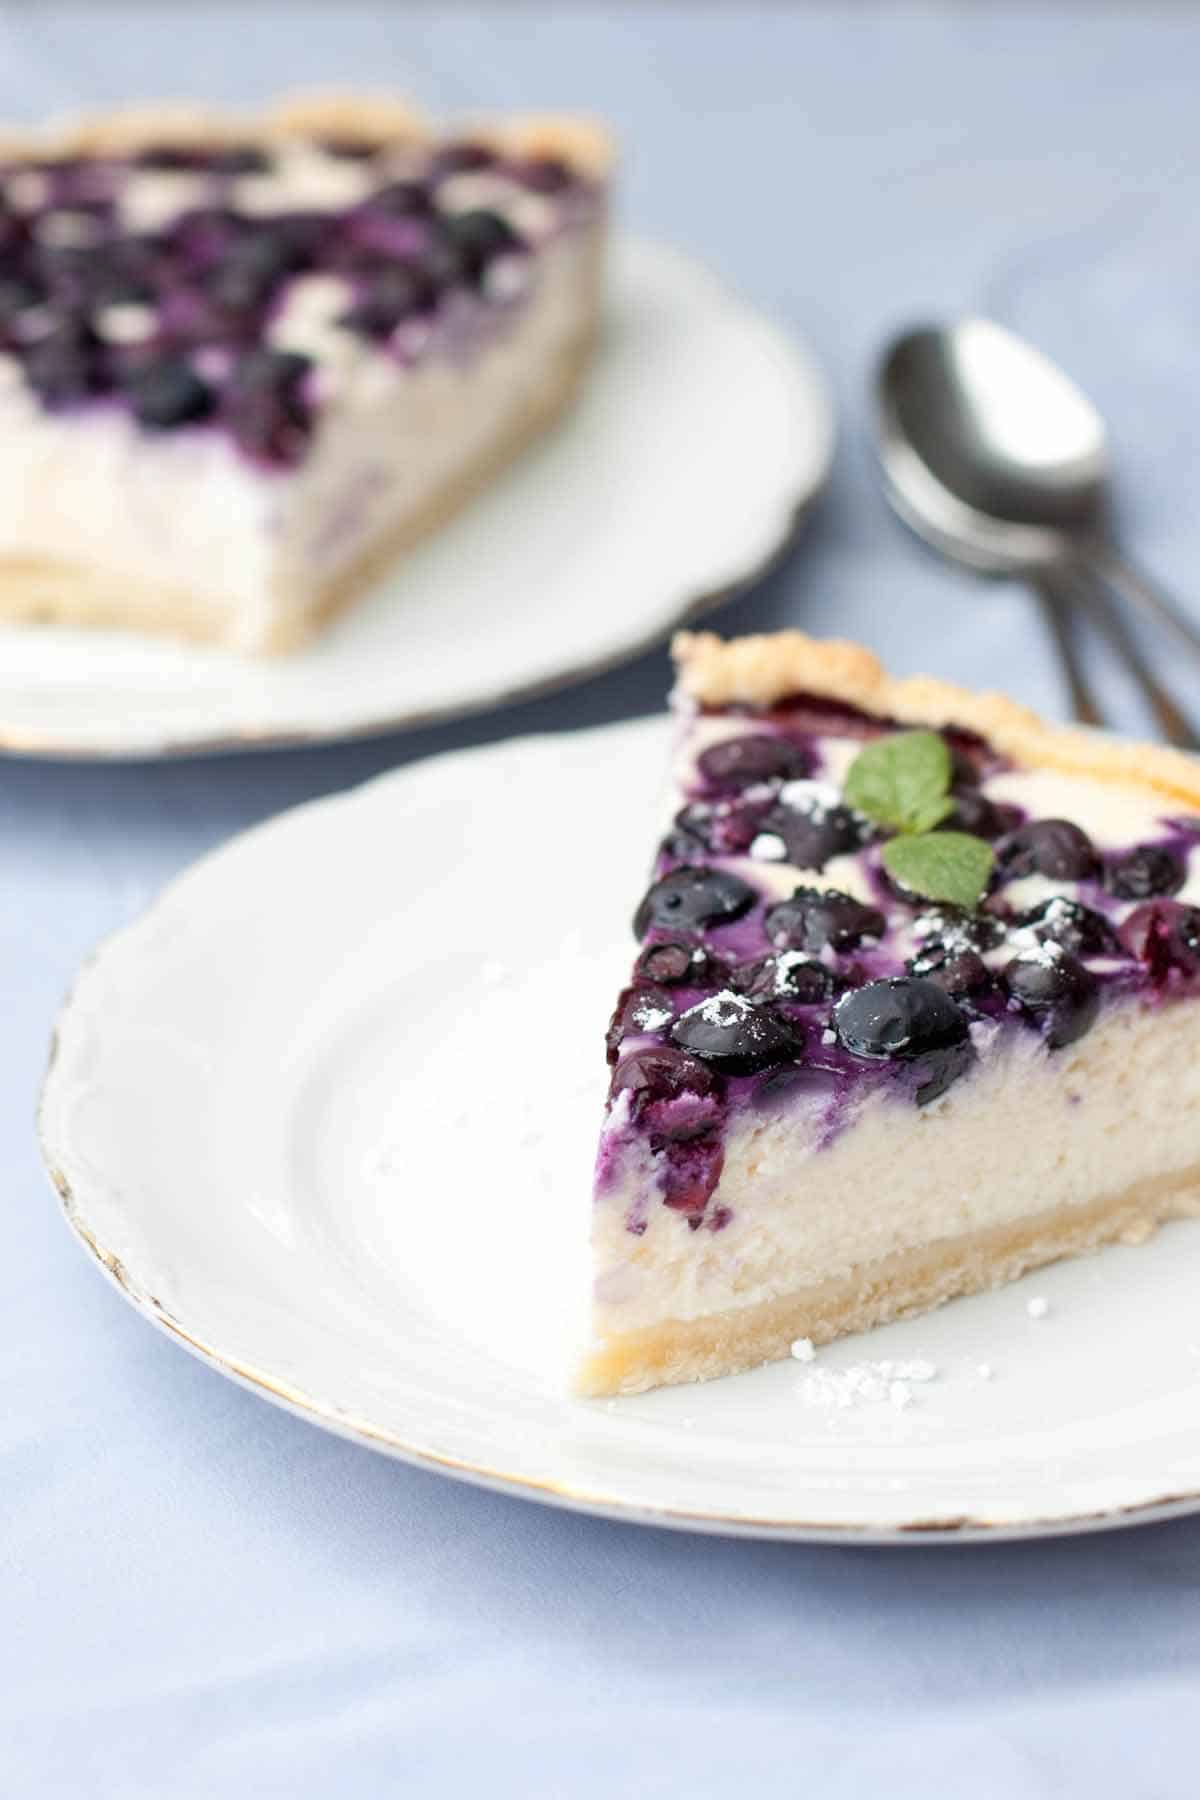 Two plates of blueberry cheesecake.